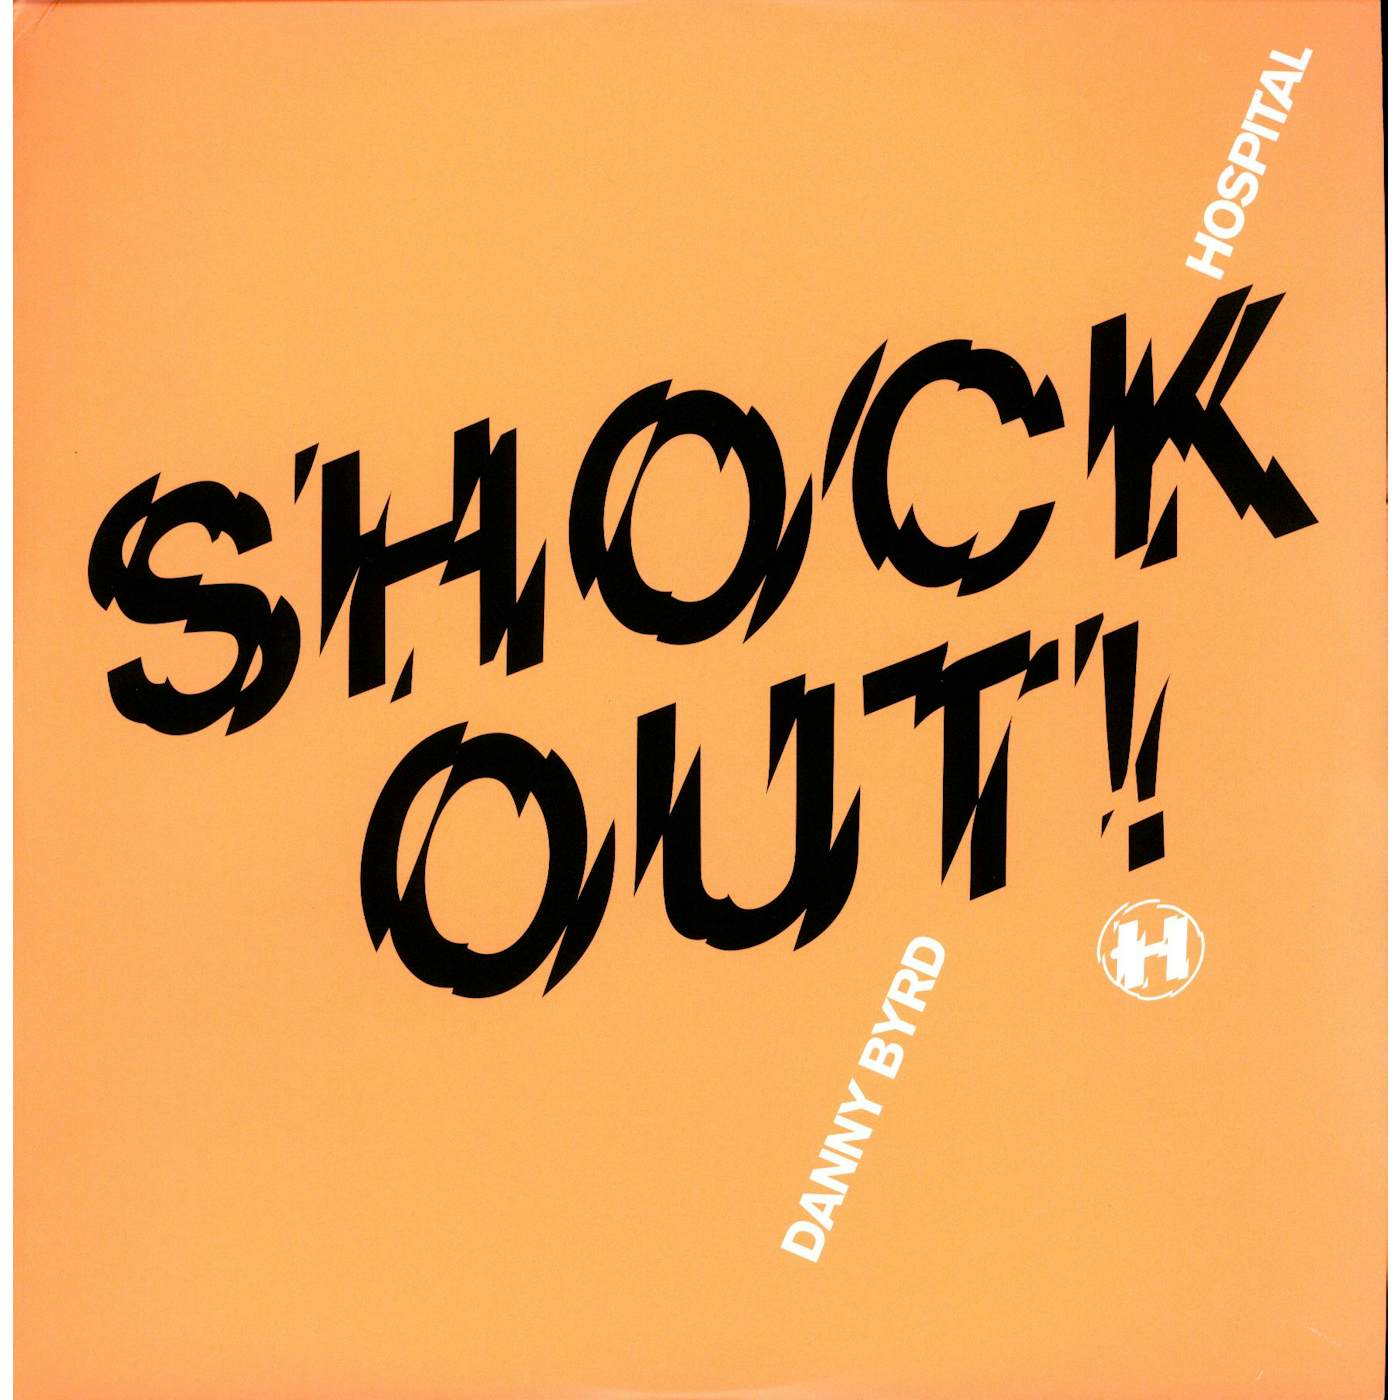 Danny Byrd Shock Out Vinyl Record